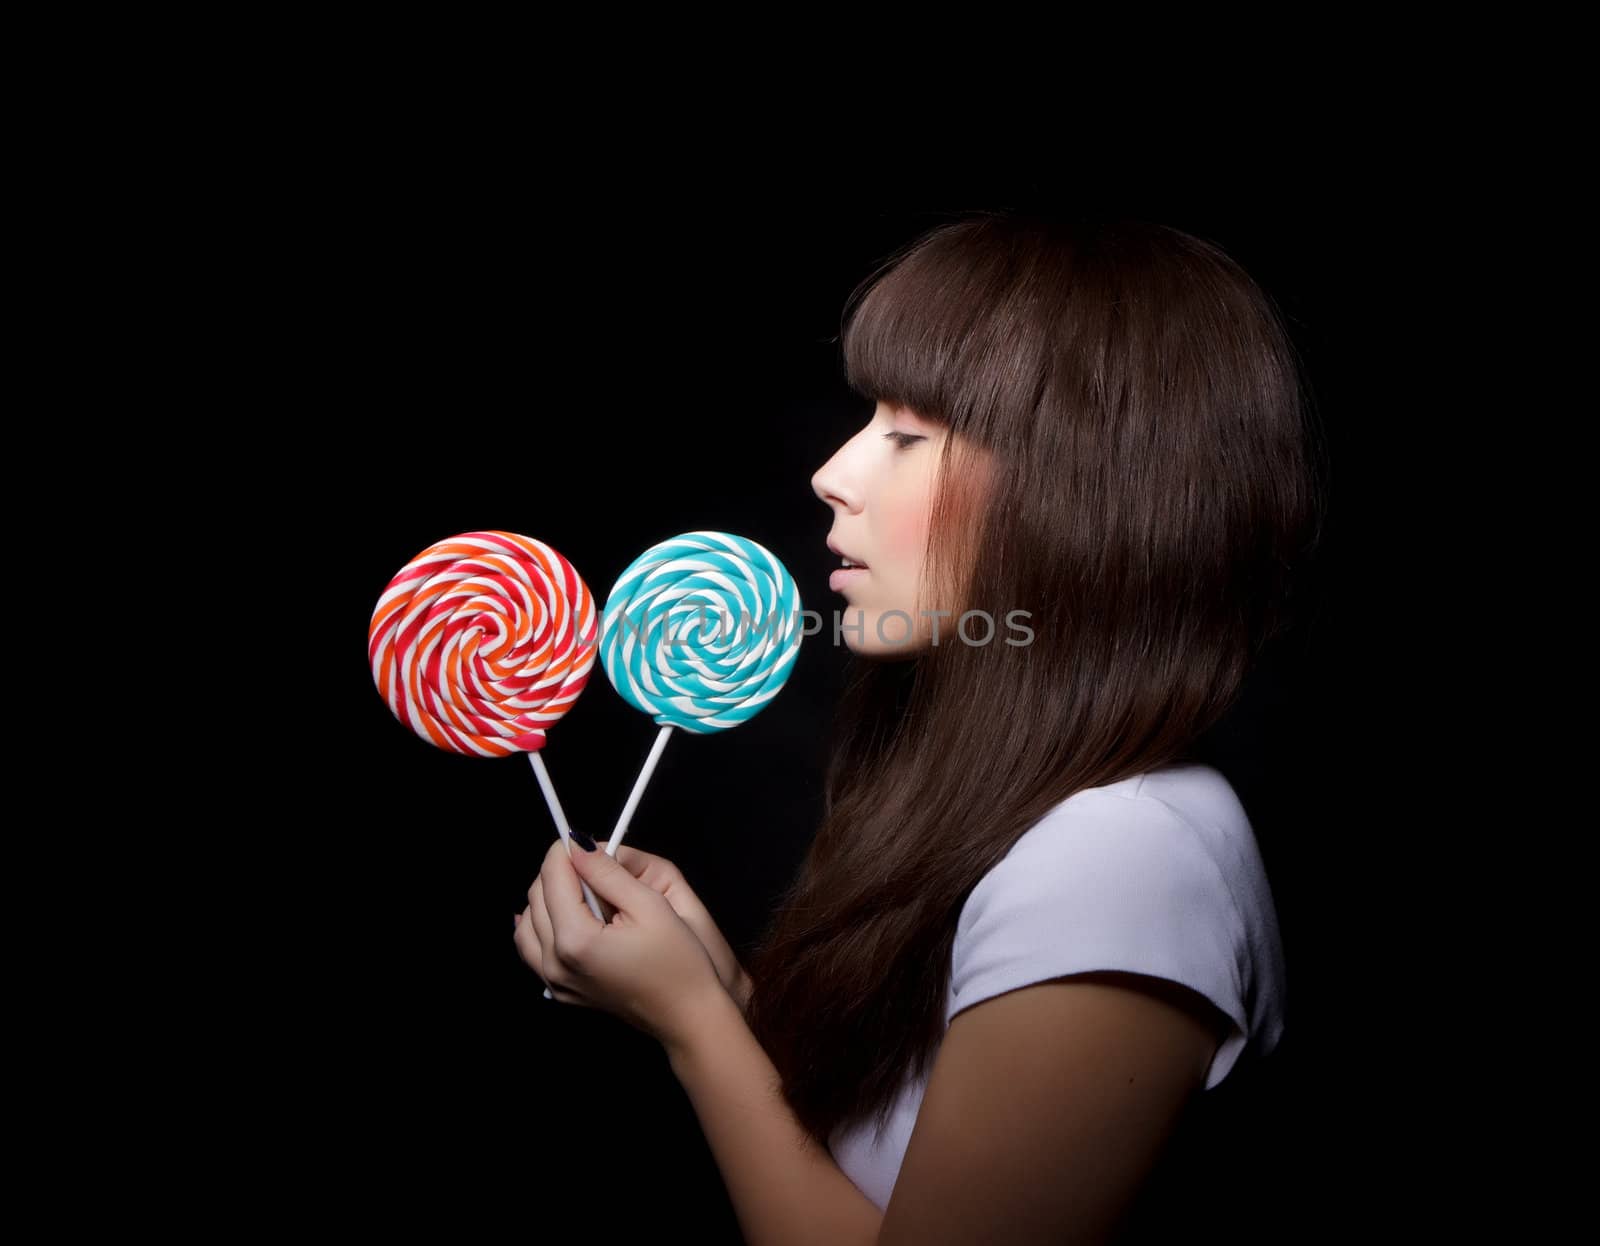 
young woman with lolipop, black background